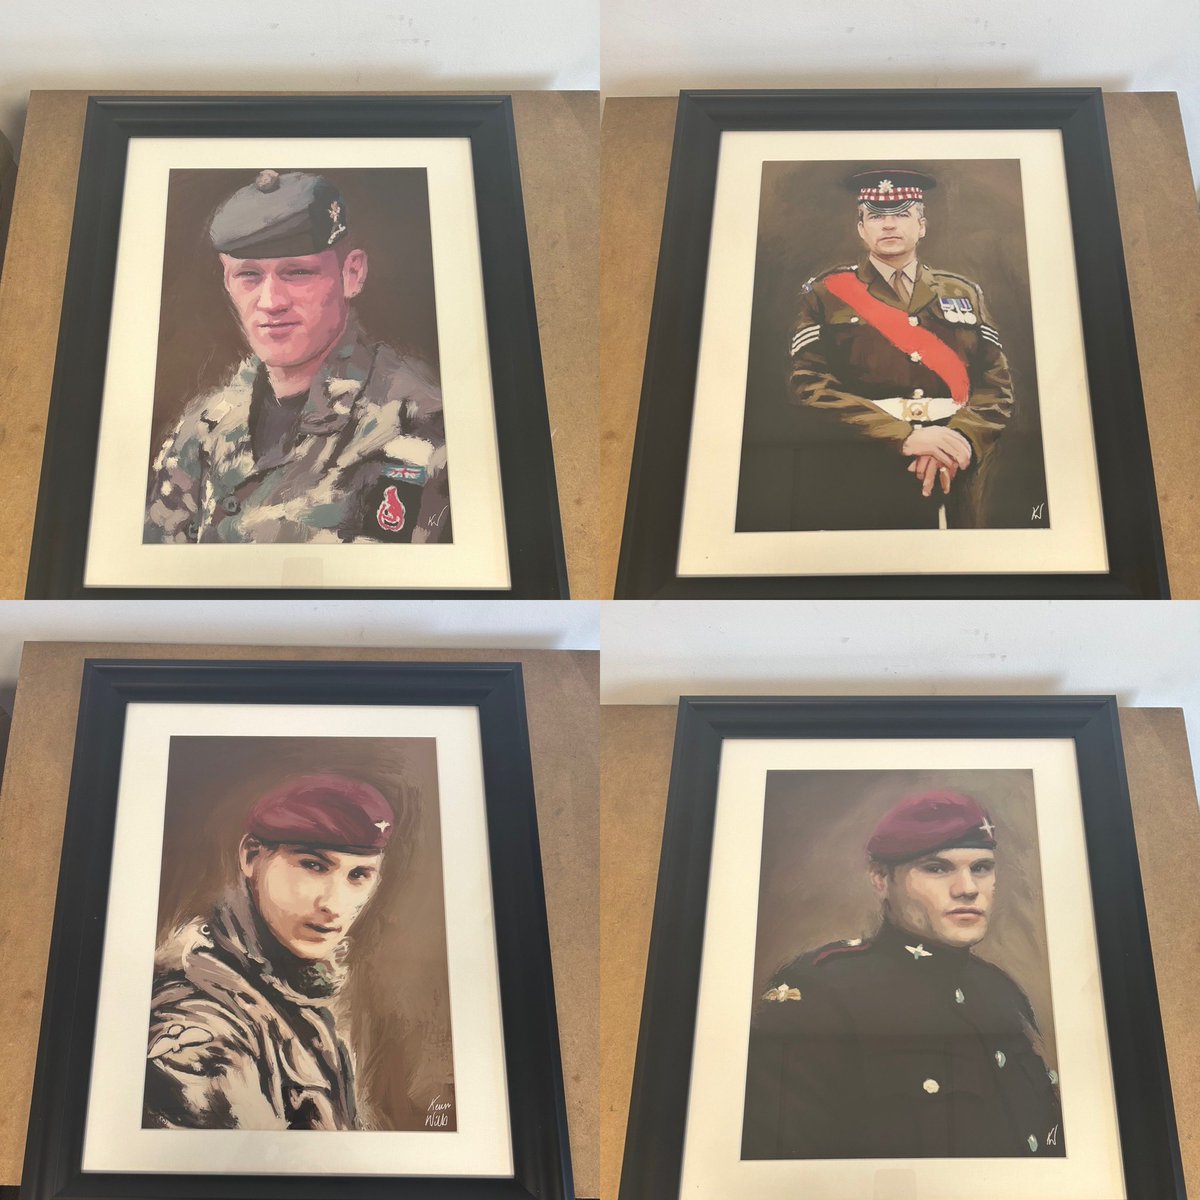 Just some of the portraits framed up and boxed up ready to go to the families of the fallen of Afghanistan Sorry I framed and and boxed up a few more but forgot to take photos!
#WeWillRememberThem #TheFallenOfAfghanistan #BritishArmy #RoyalNavy